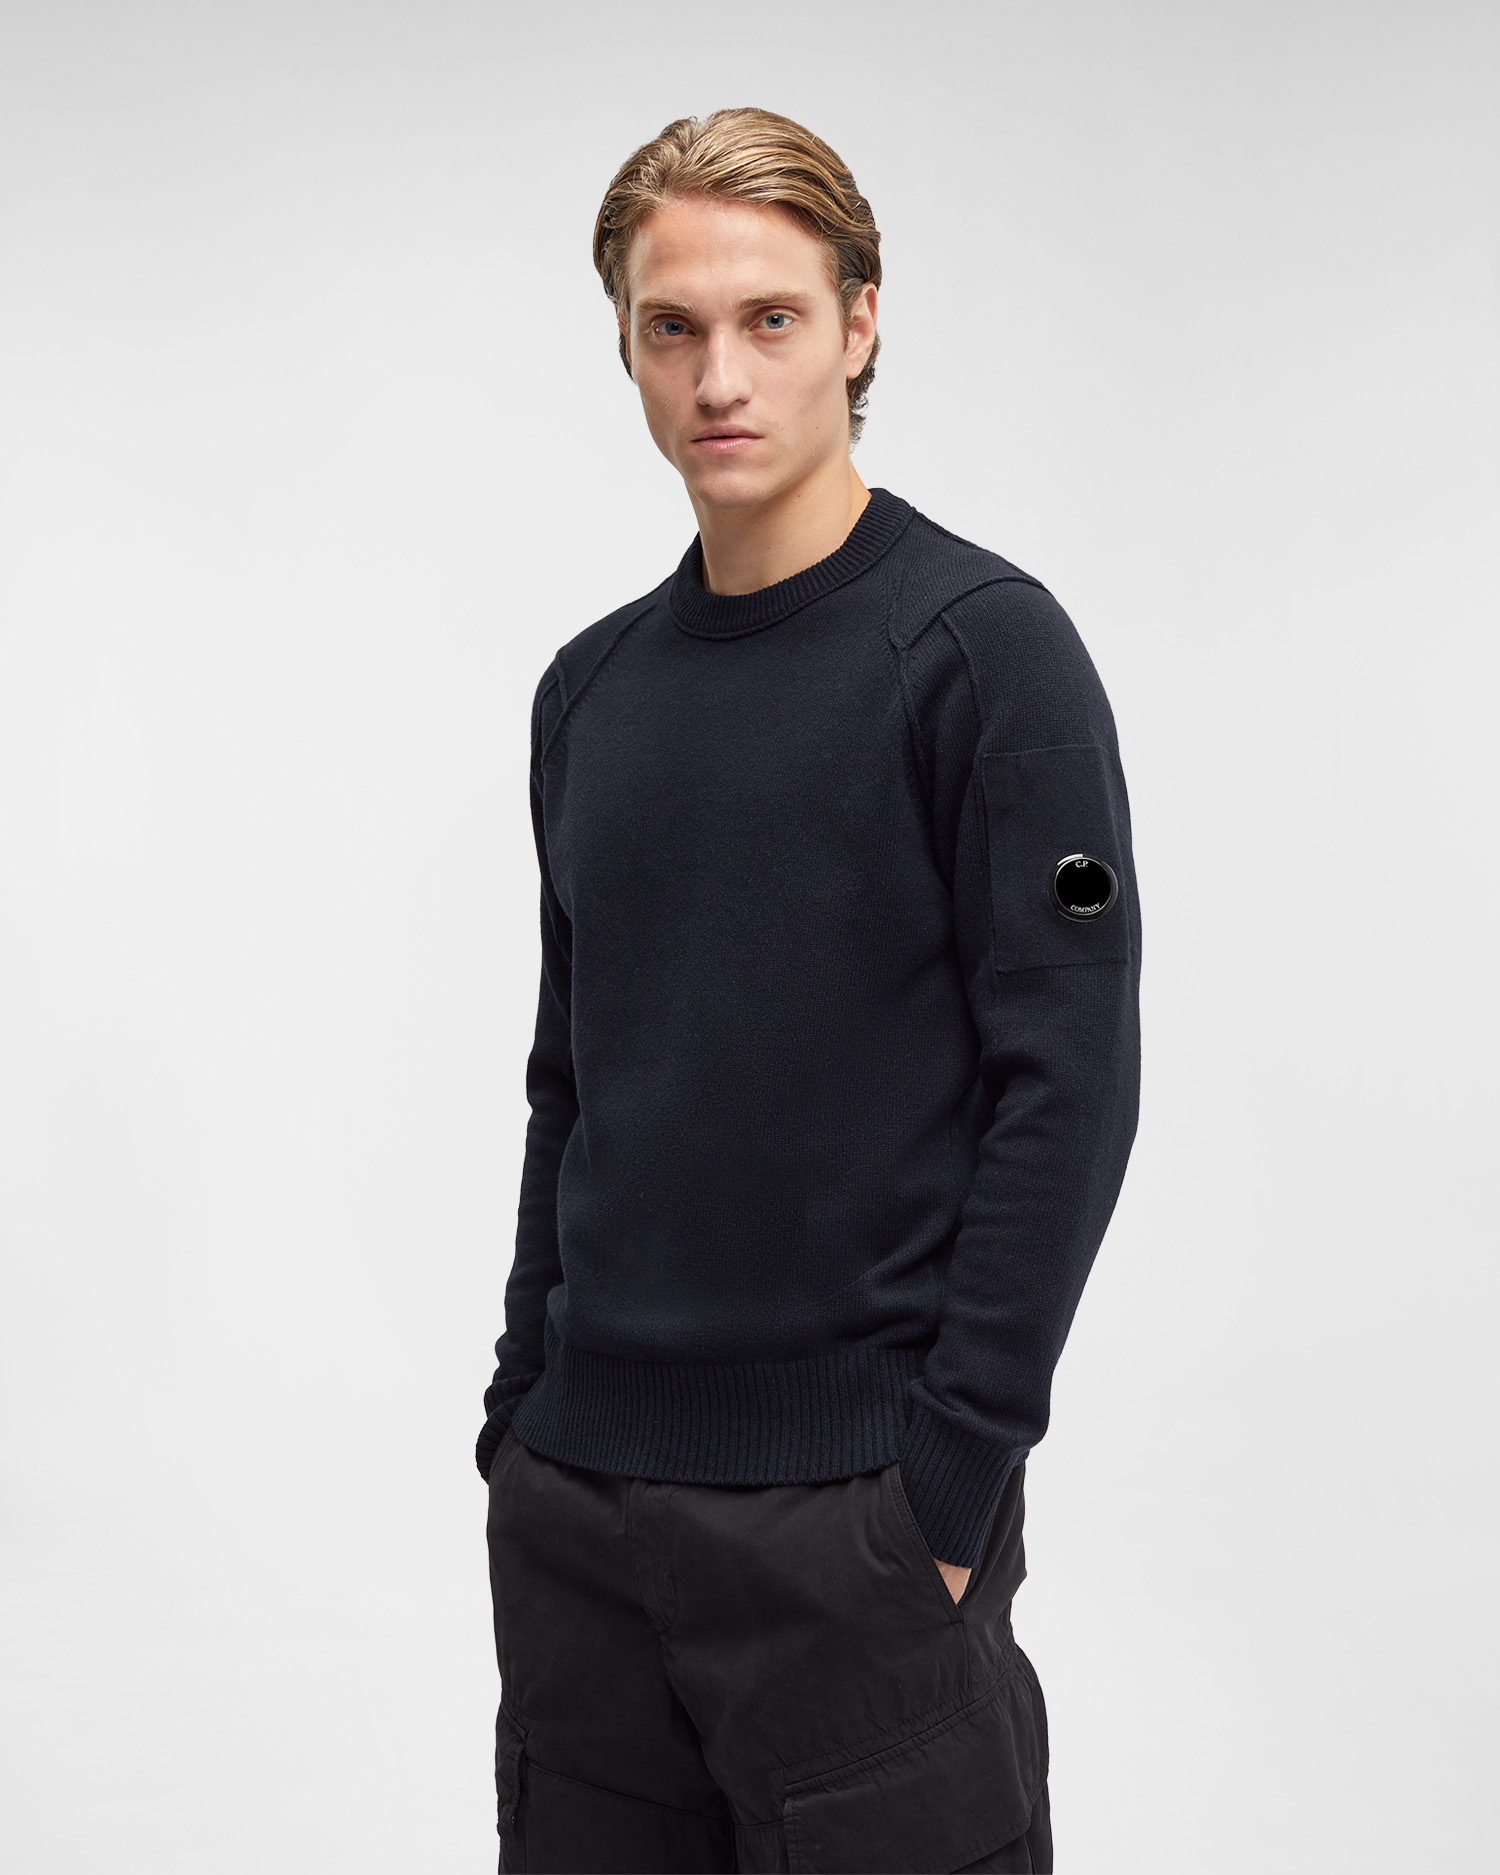 Lambswool Jumper | C.P. Company Online Store